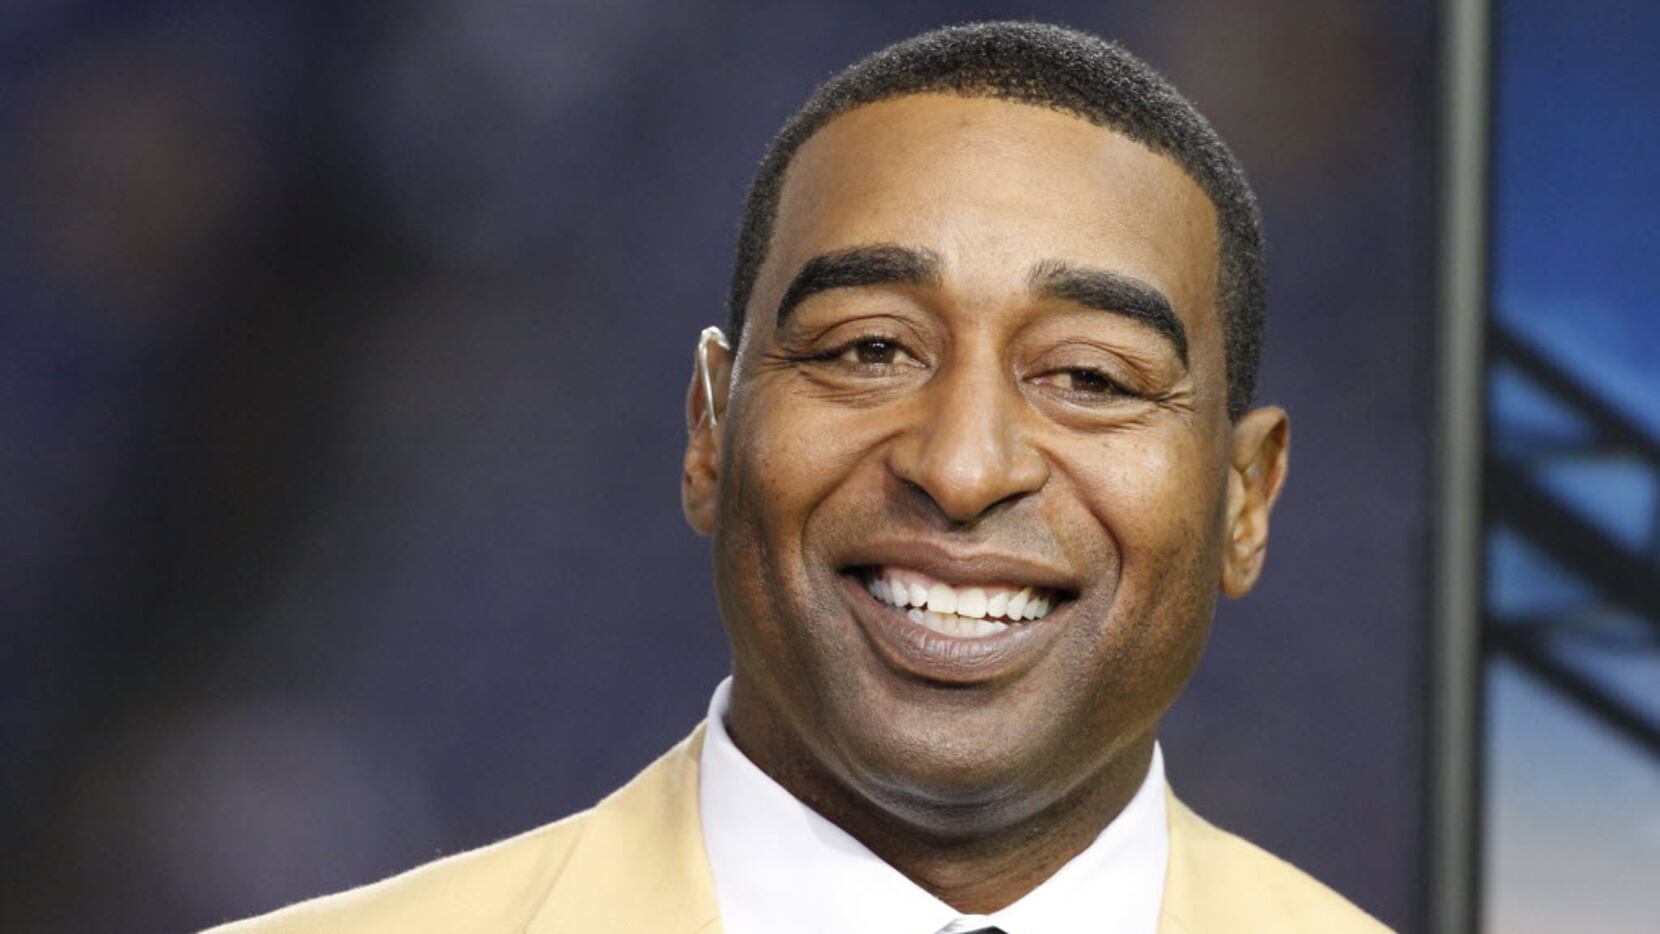 FILE - This is a Nov. 7, 2013, file photo showing Cris Carter smiling in the NFL booth...